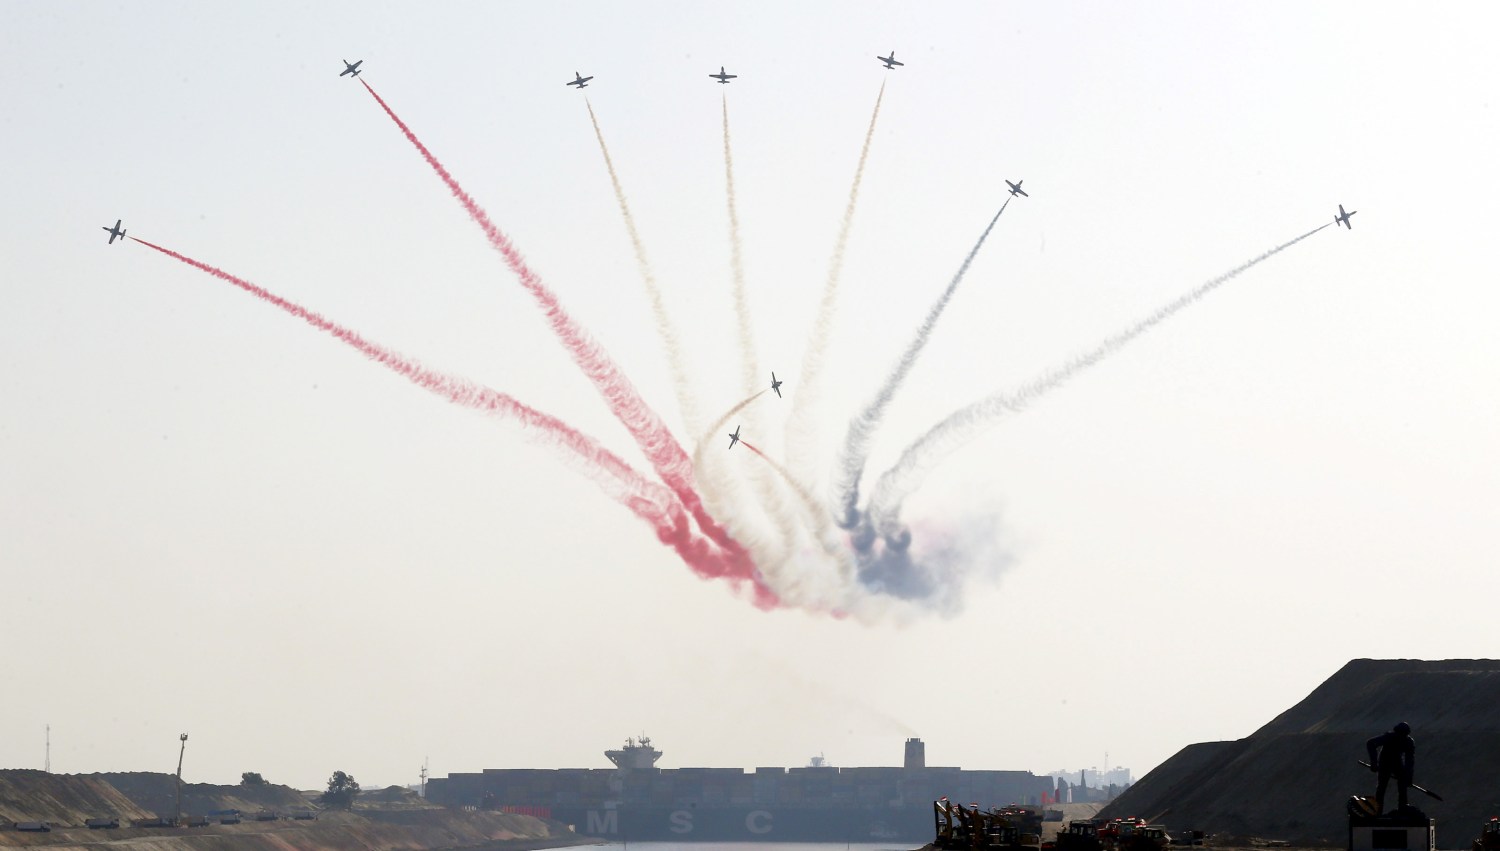 Egyptian air force planes parade in front of a cargo container ship crossing the new section of the Suez Canal after the opening ceremony of the new Suez Canal, in Ismailia, Egypt, August 6, 2015. Egypt staged a show of international support on Thursday as it inaugurated a major extension of the Suez Canal which President Abdel Fattah al-Sisi hopes will power an economic turnaround in the Arab world's most populous country. REUTERS/Amr Abdallah Dalsh REUTERS/Amr Abdallah Dalsh - RTX1NCNT